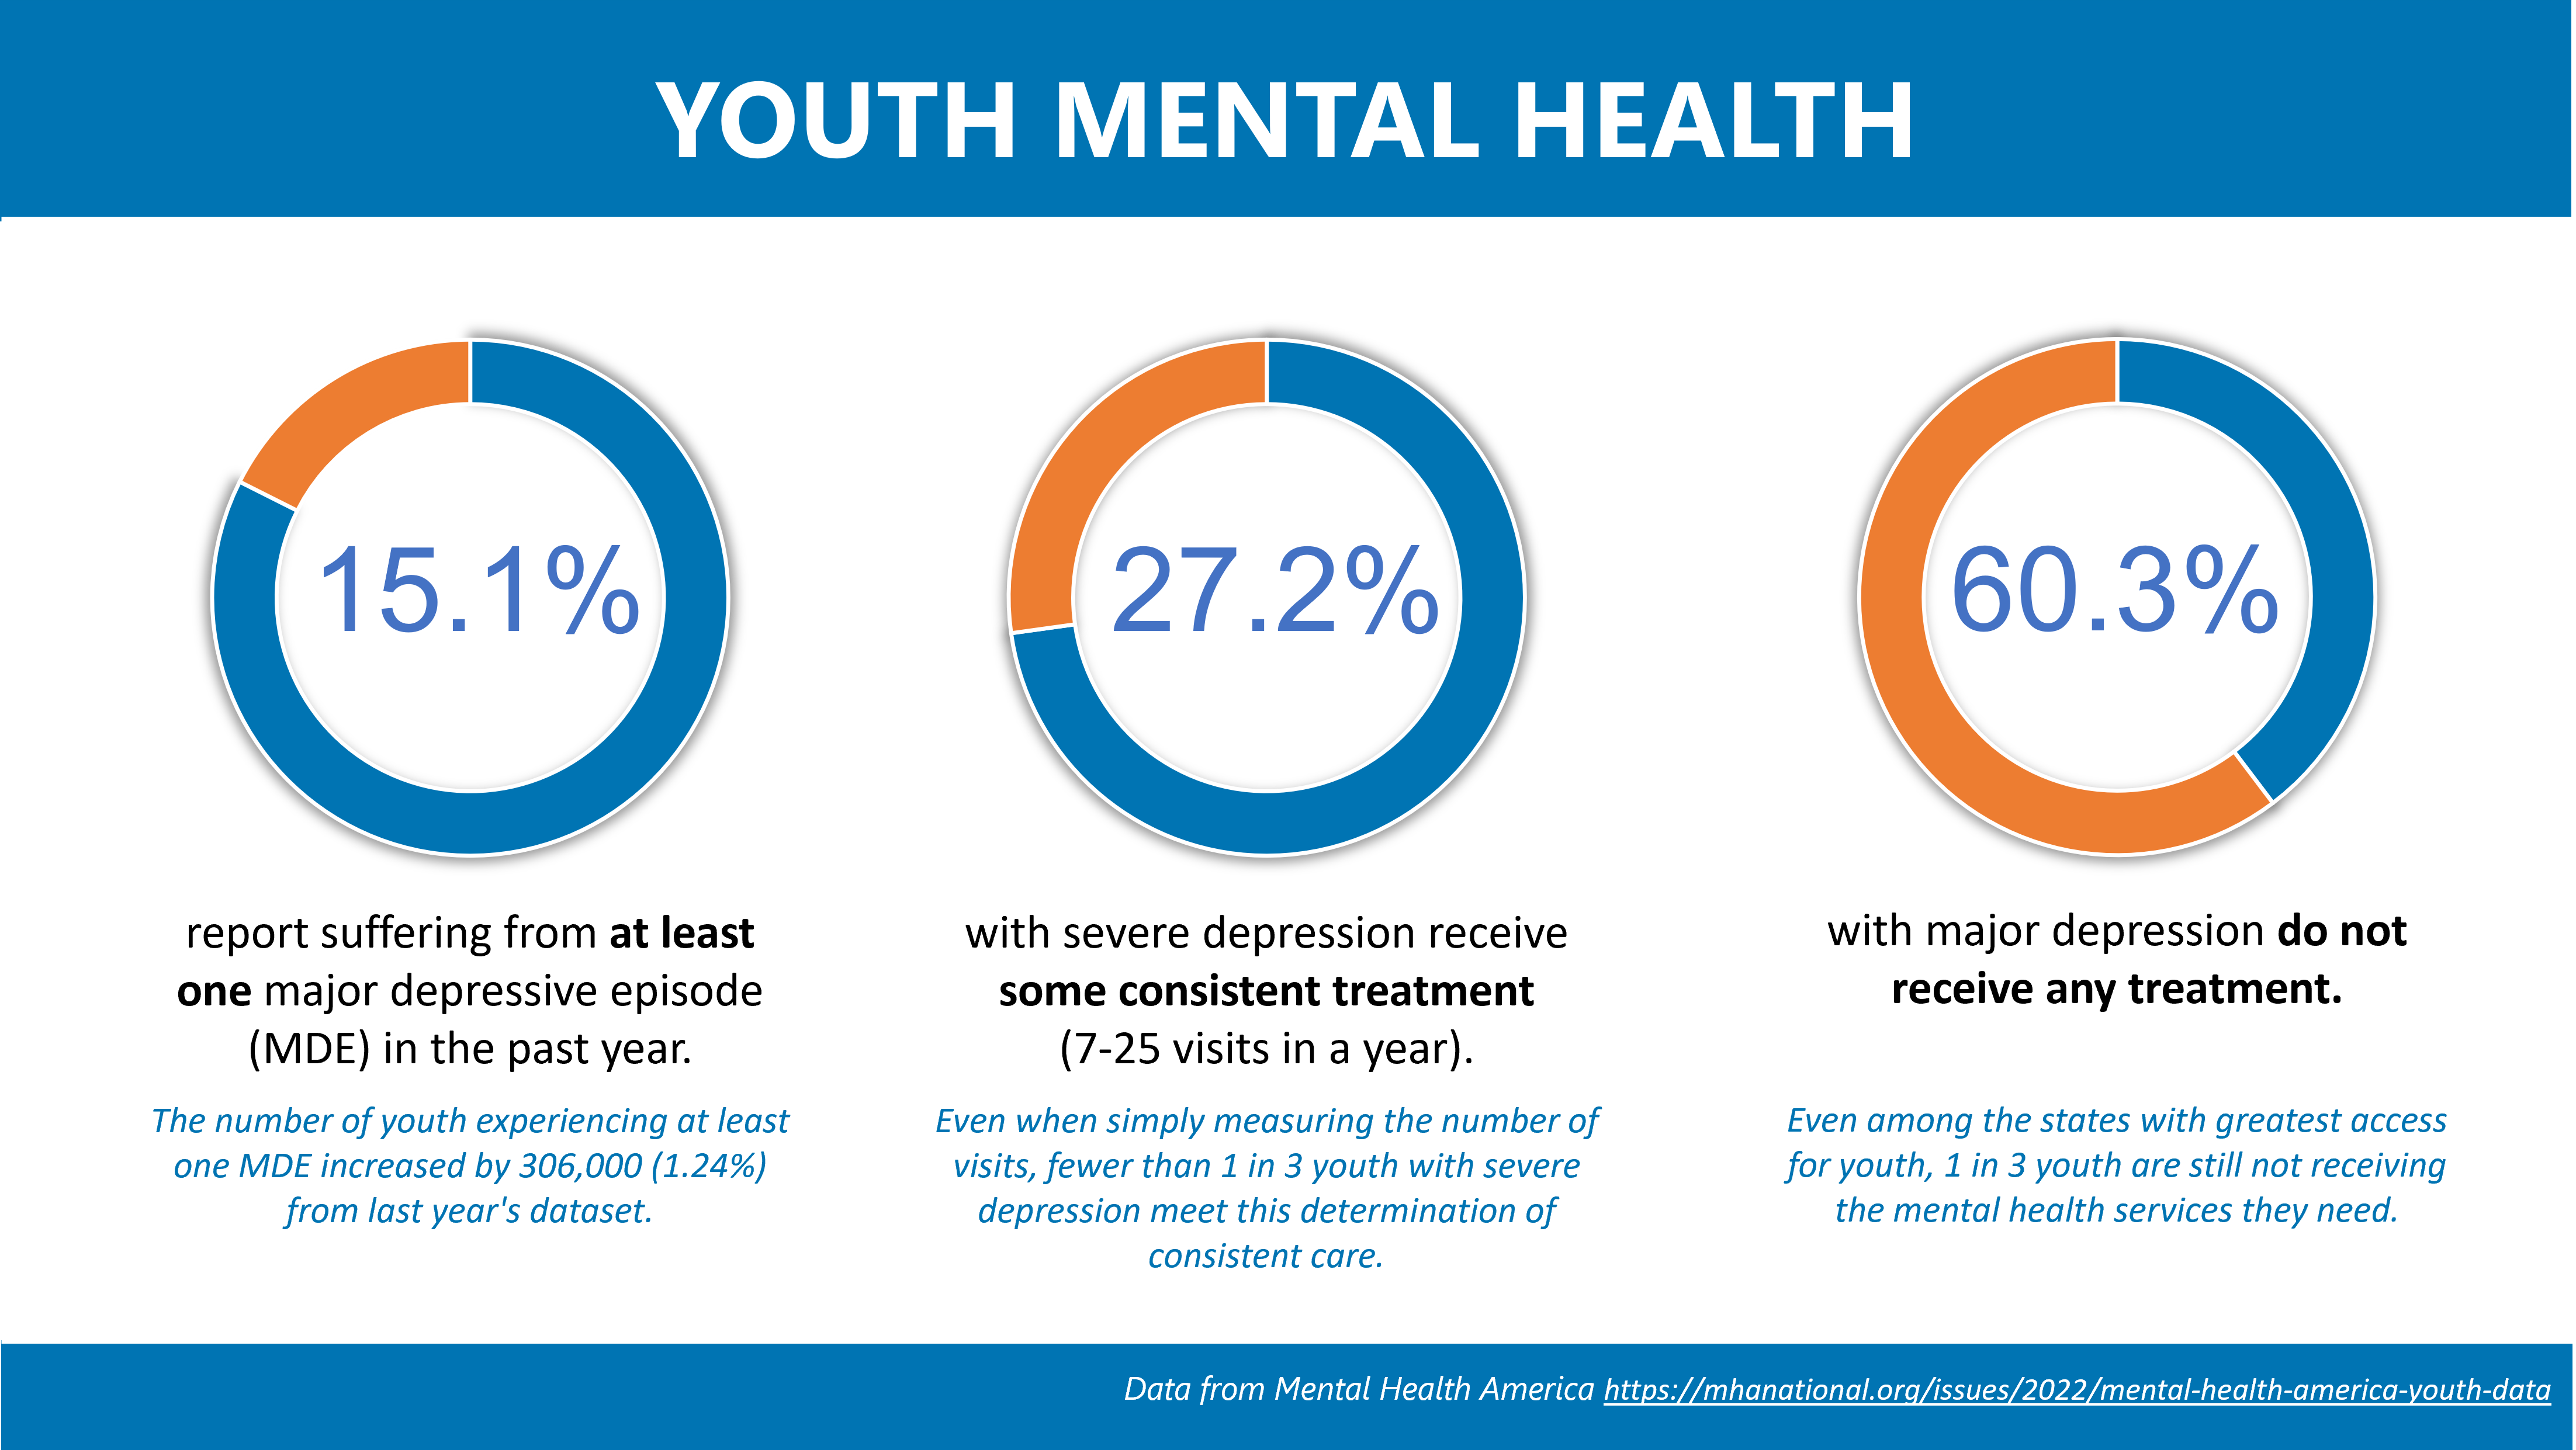 Reimagining Youth Behavioral Health Needs with Empowerment Counseling